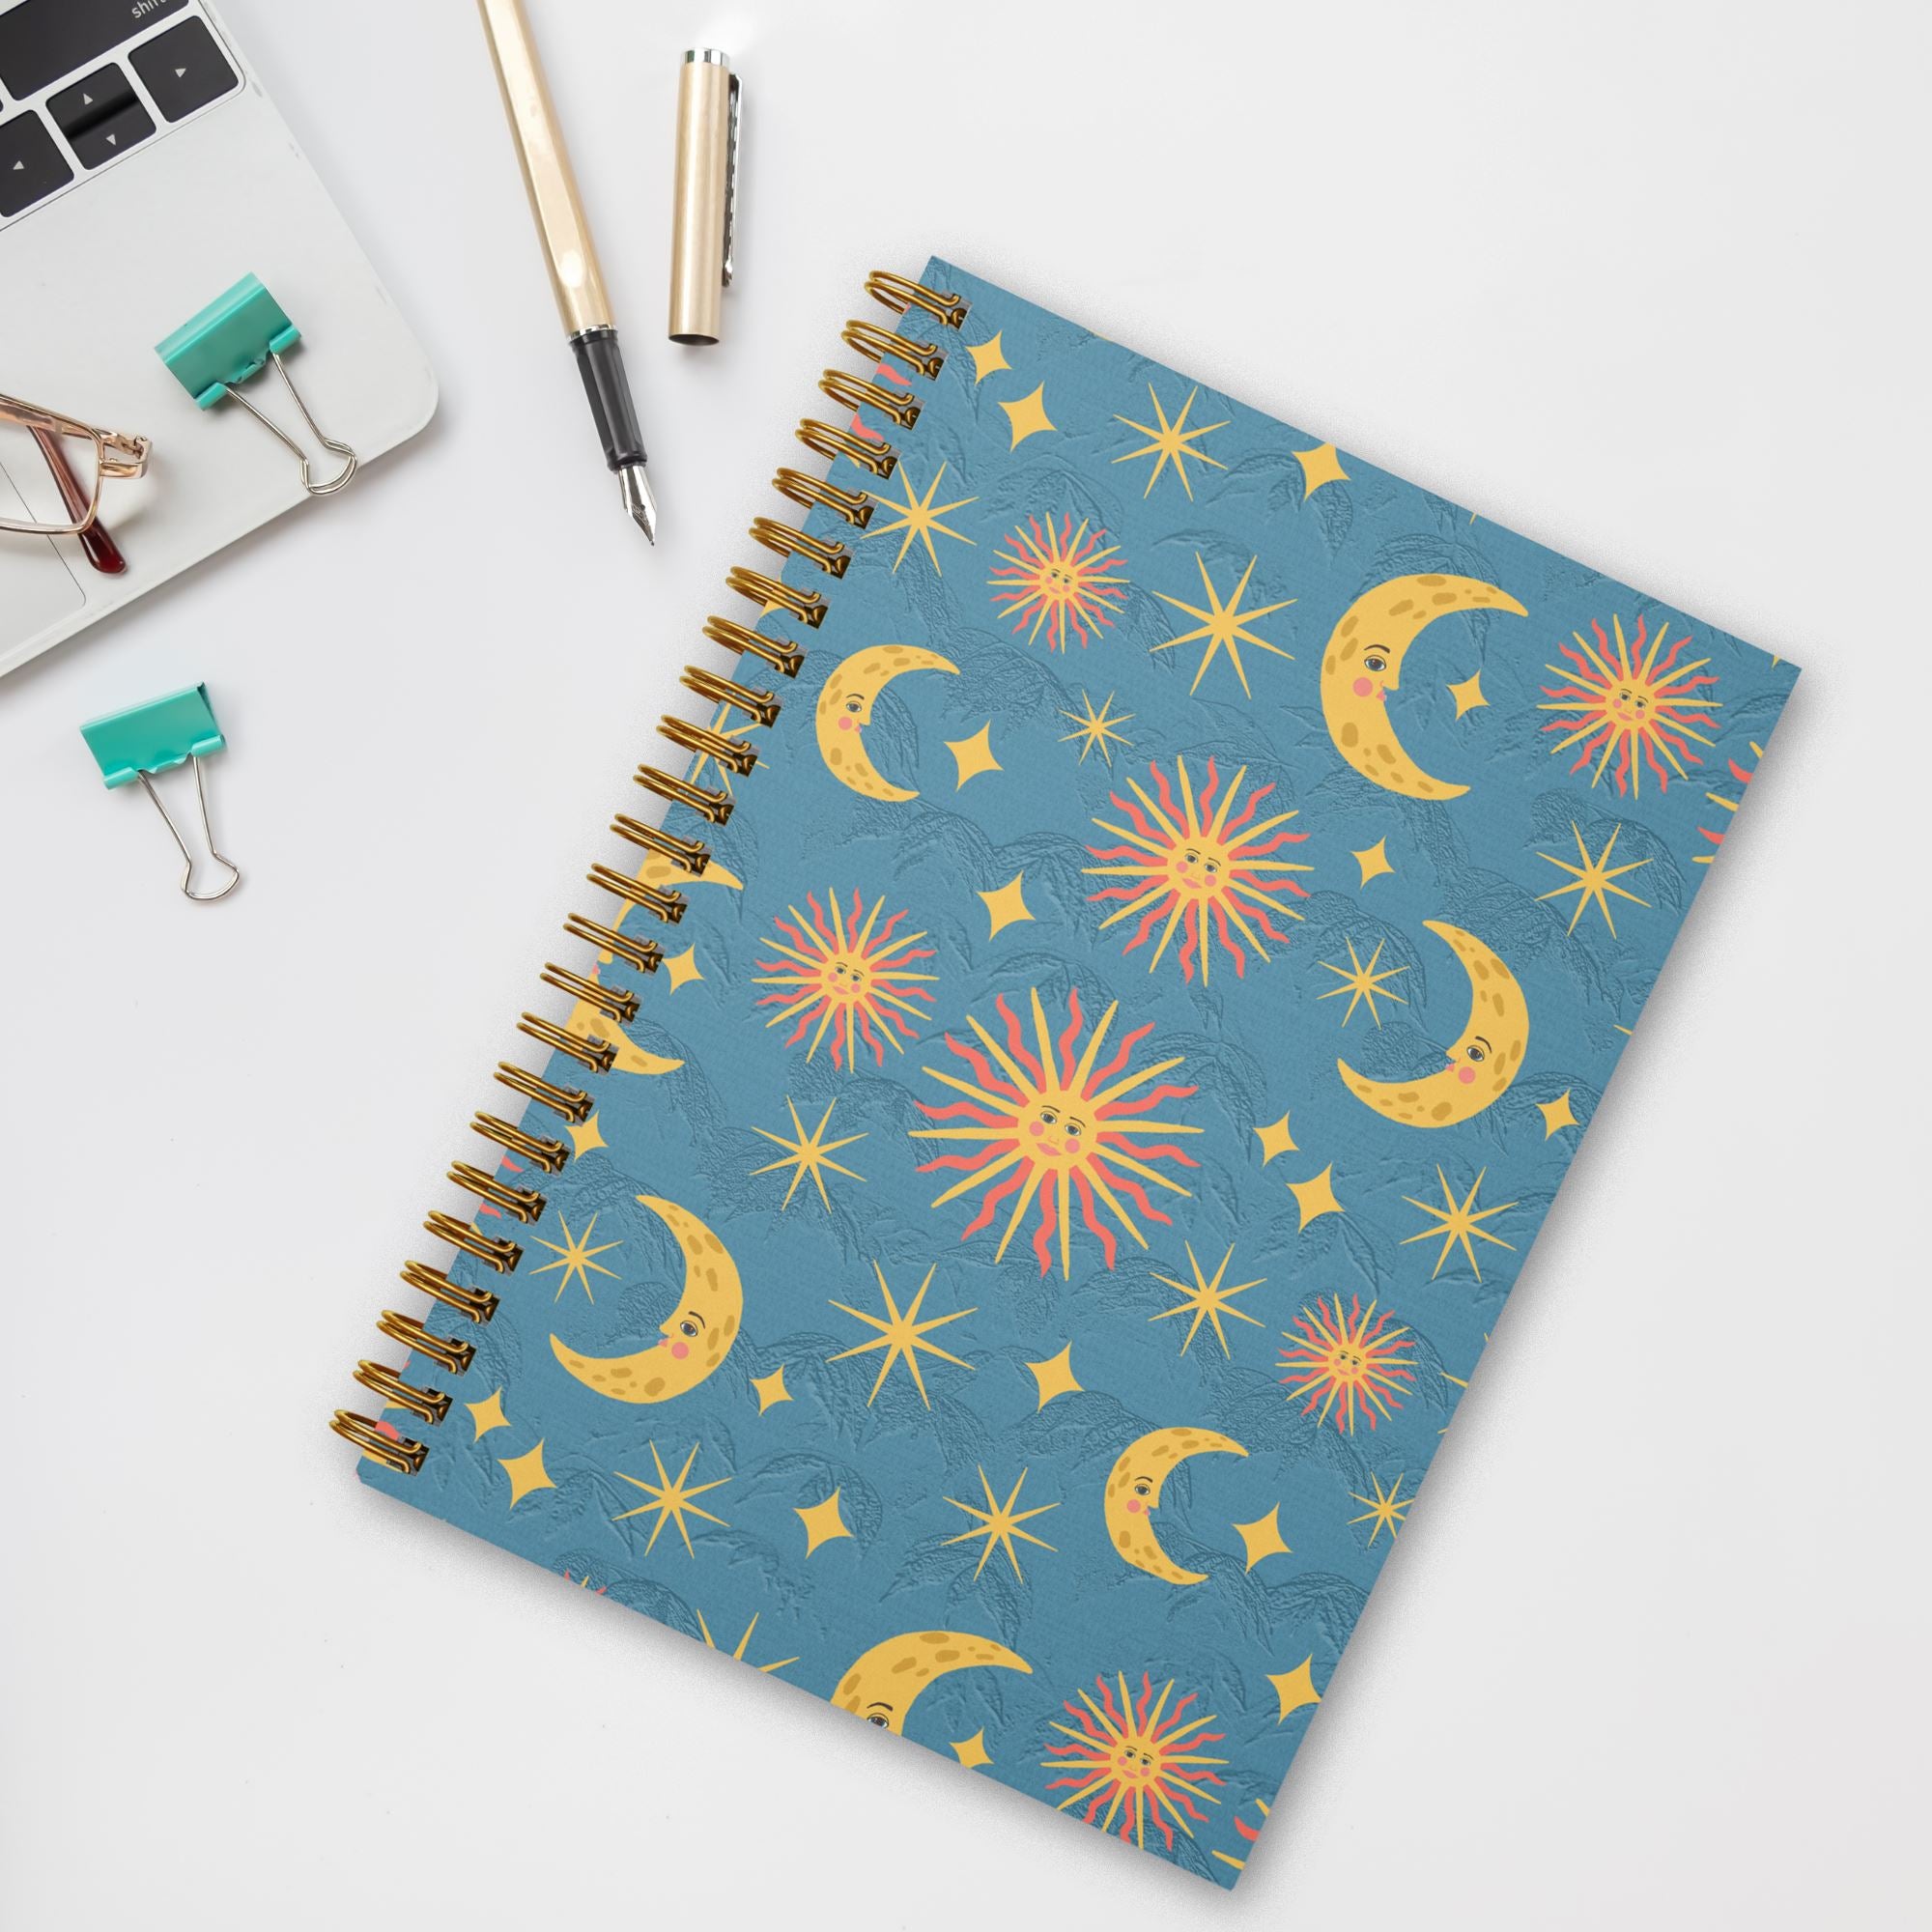 An eco friendly 8.5 x 5.5 inch wire spiral bound notebook with 120 lined pages featuring hand illustrated suns, moons, and stars pattern on a blue background on the cover on a table with office supplies.